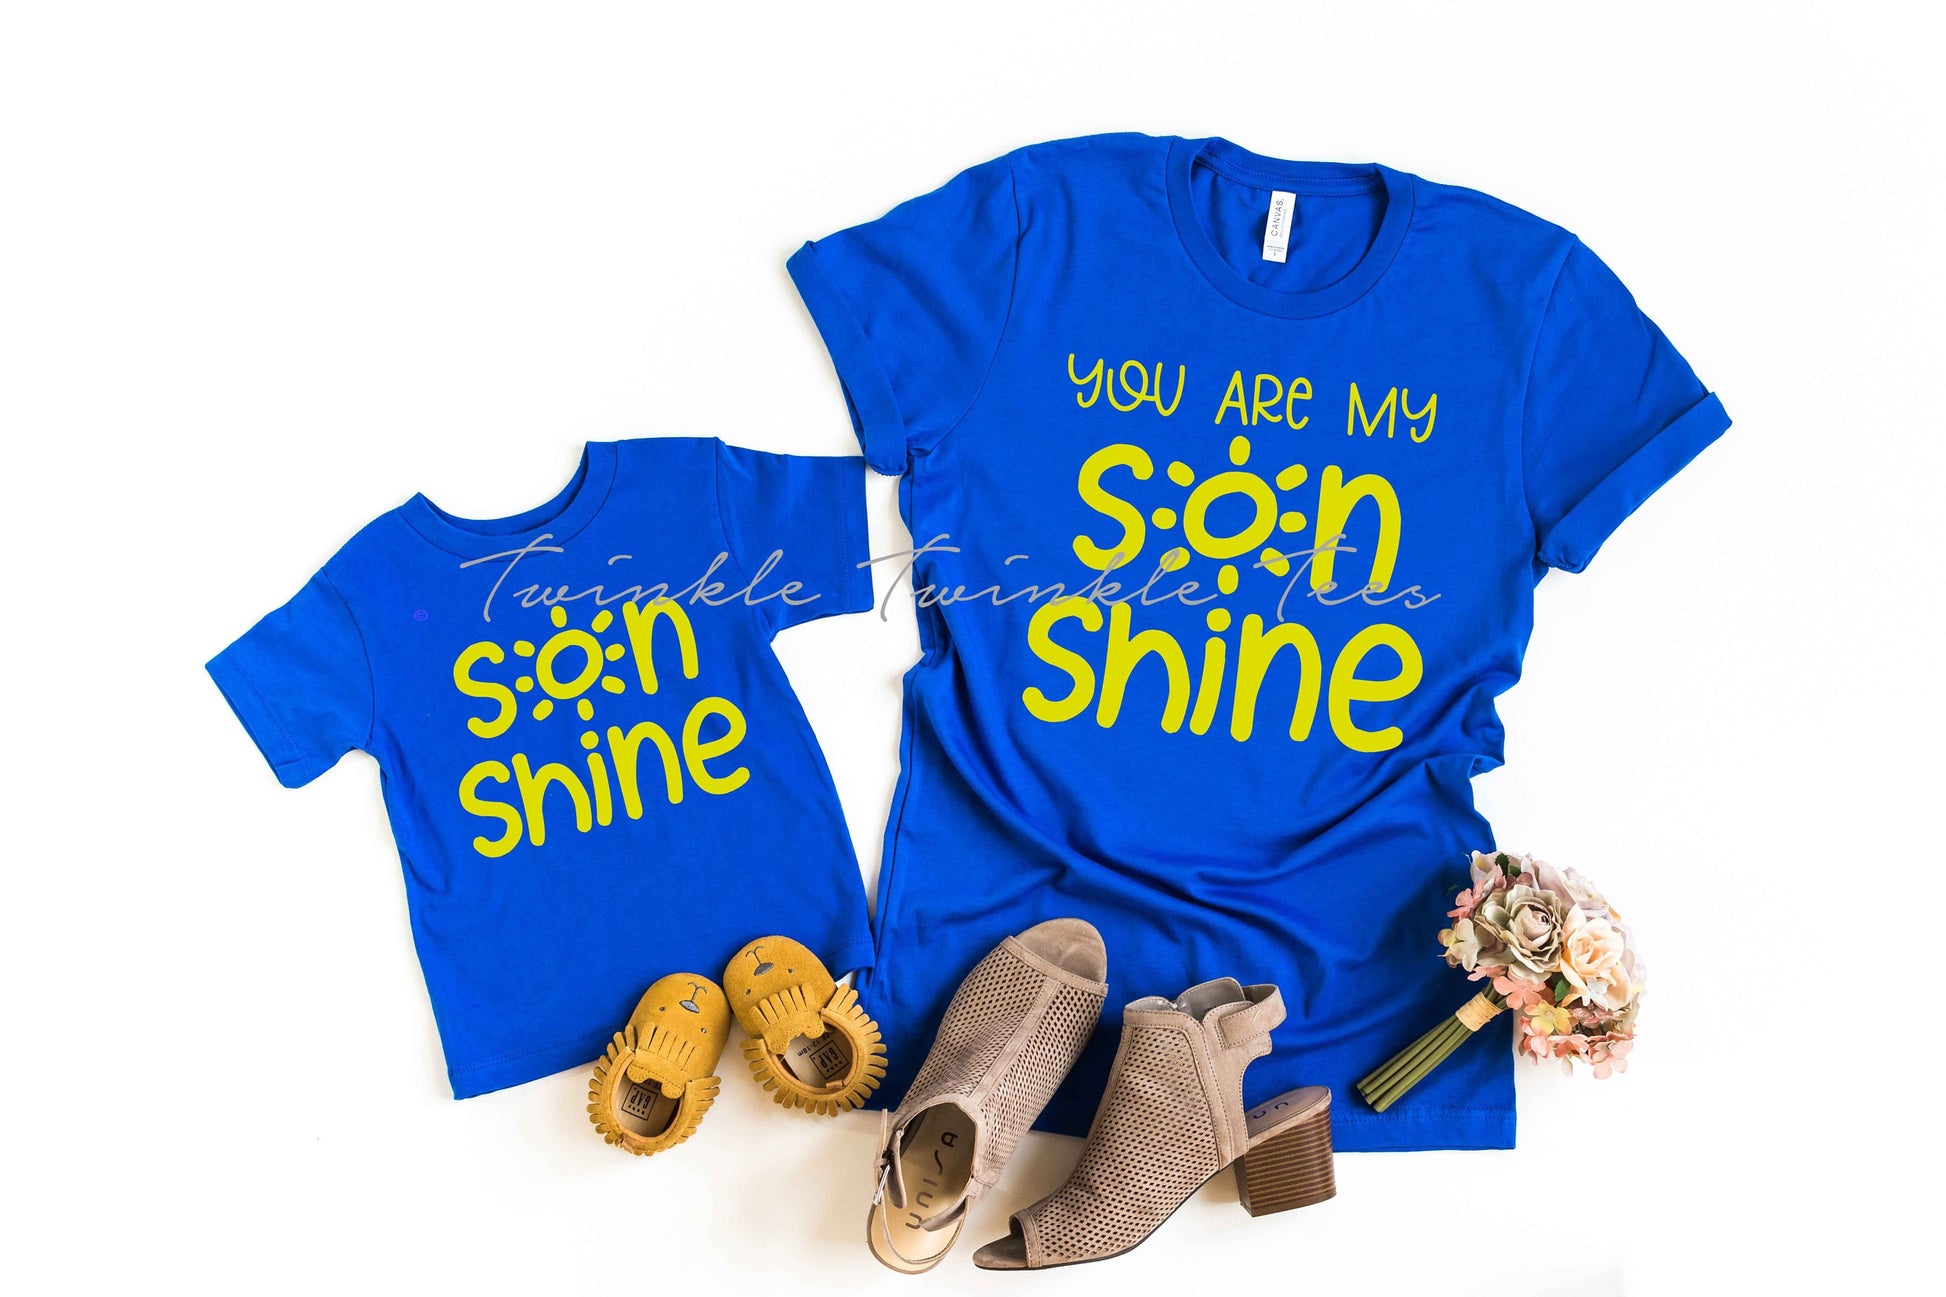 You are My SonShine and SonShine Unisex Matching Blue t-shirts - Mommy and Me Shirts - Gift for Mom - Mommy and Son Shirts - Mother's Day